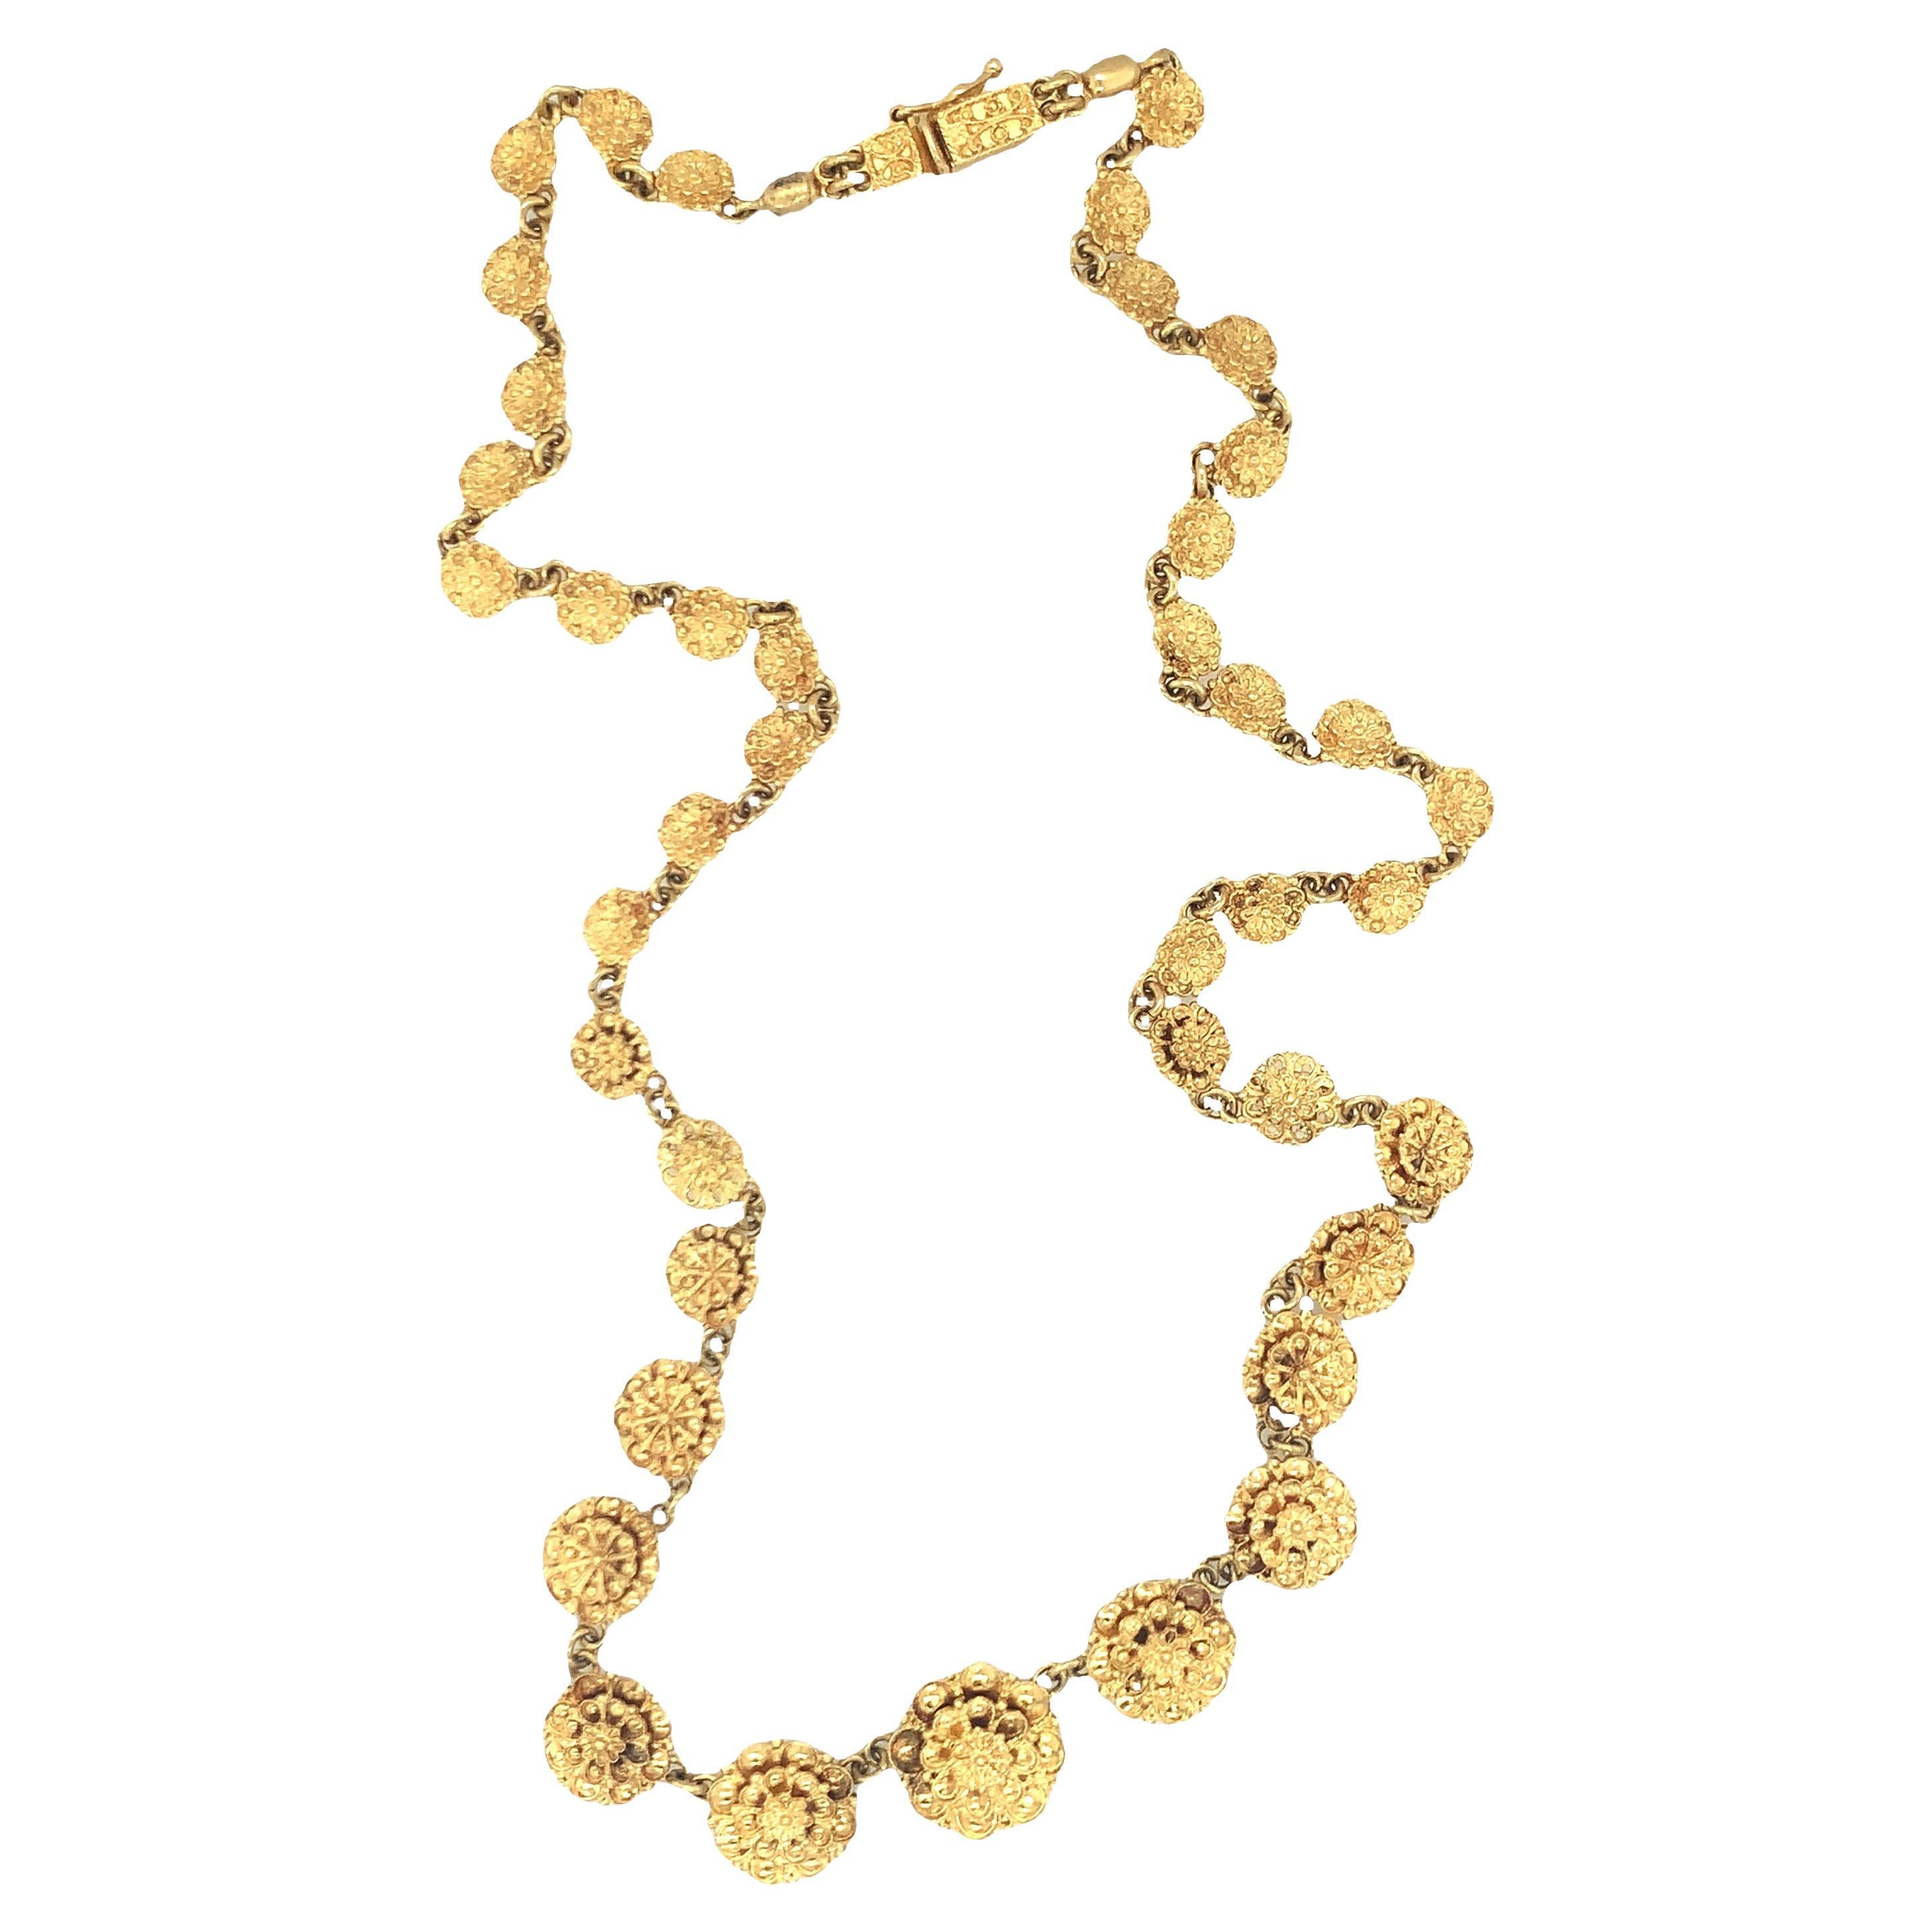 Floral Motif 18K Yellow Gold Link Necklace